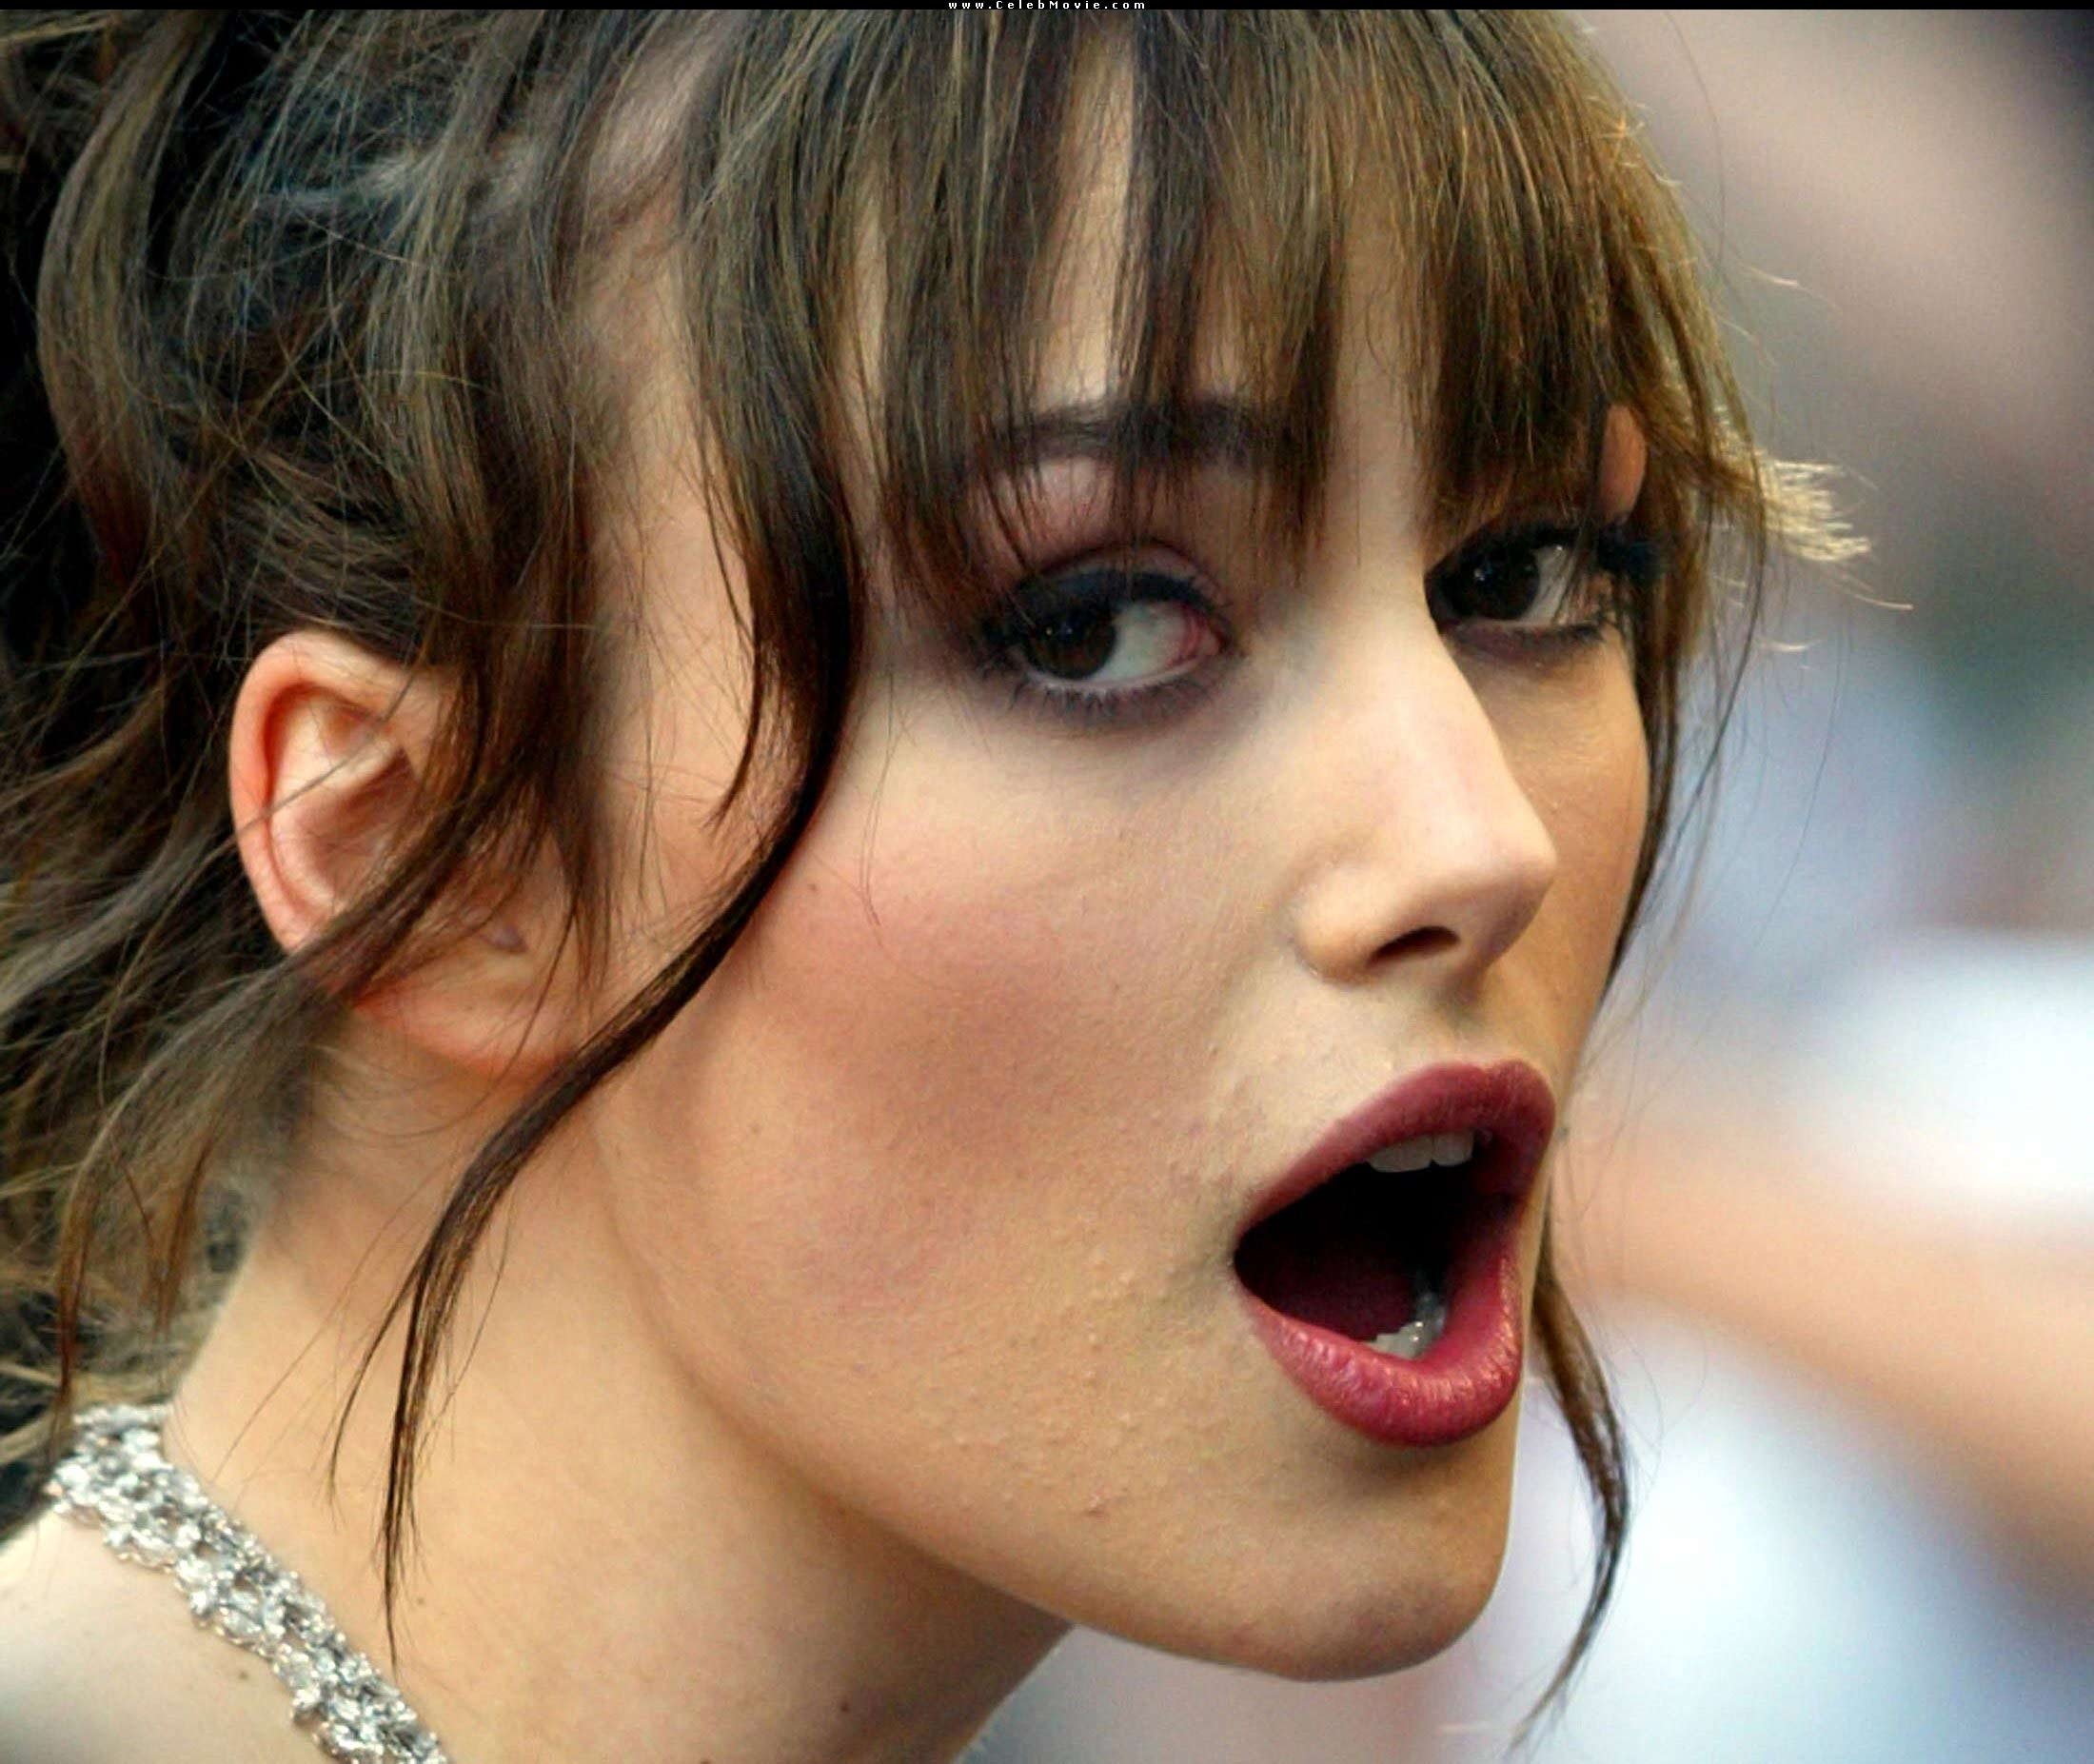 keira knightley open mouth 2200x1853 wallpapers High Quality Wallpapers,Hig...